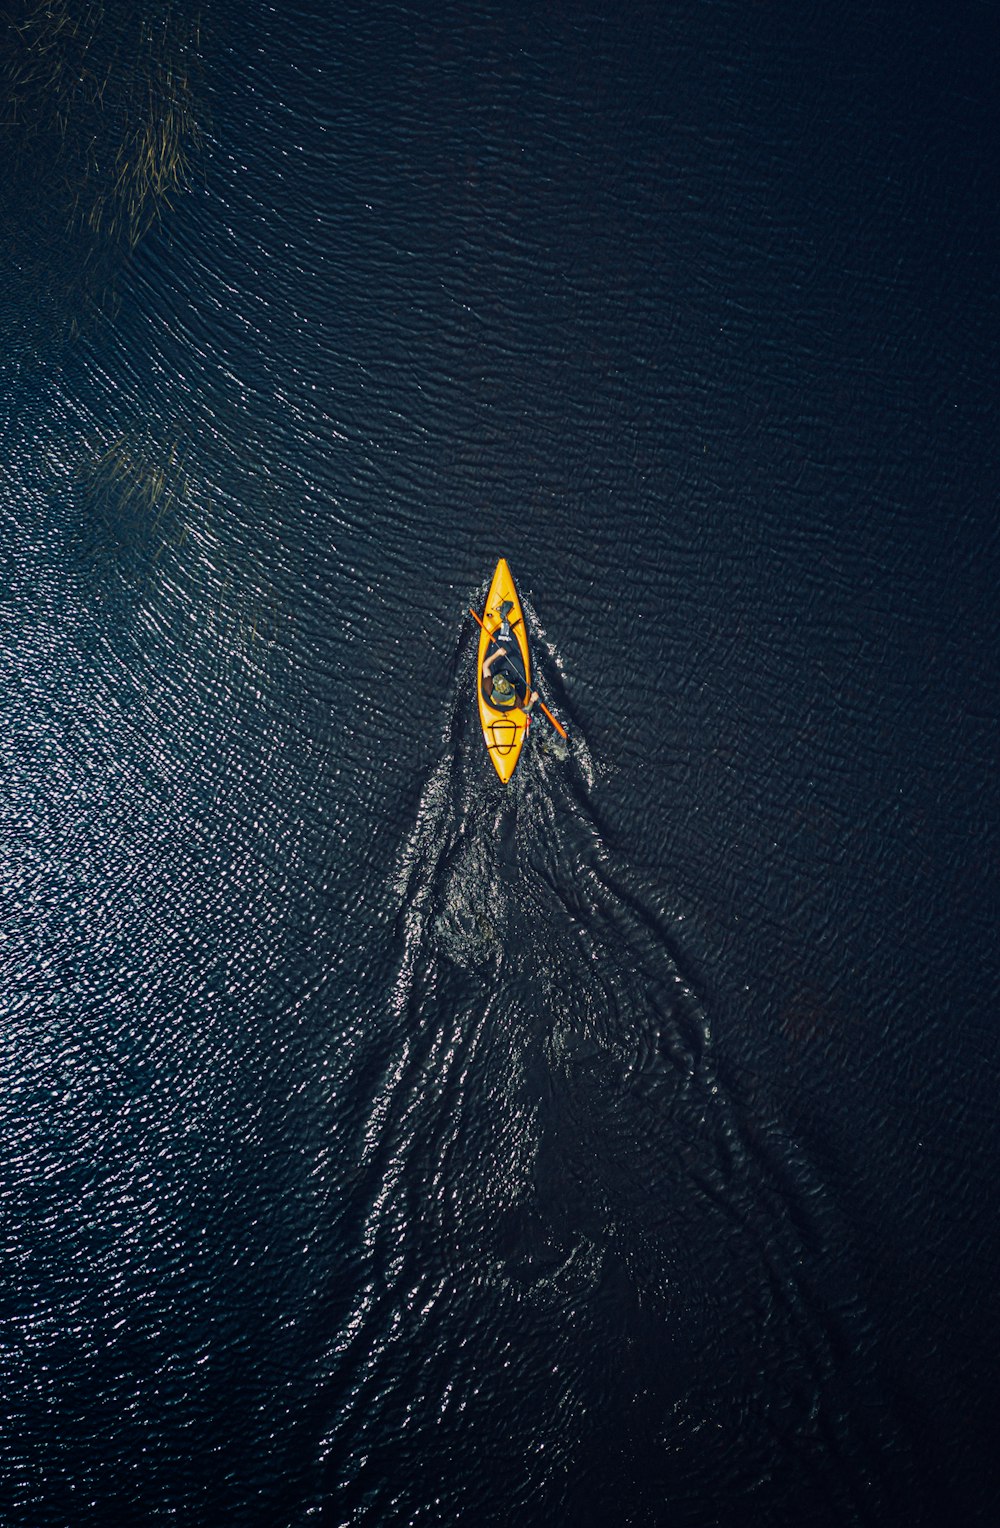 yellow and black surfboard on body of water